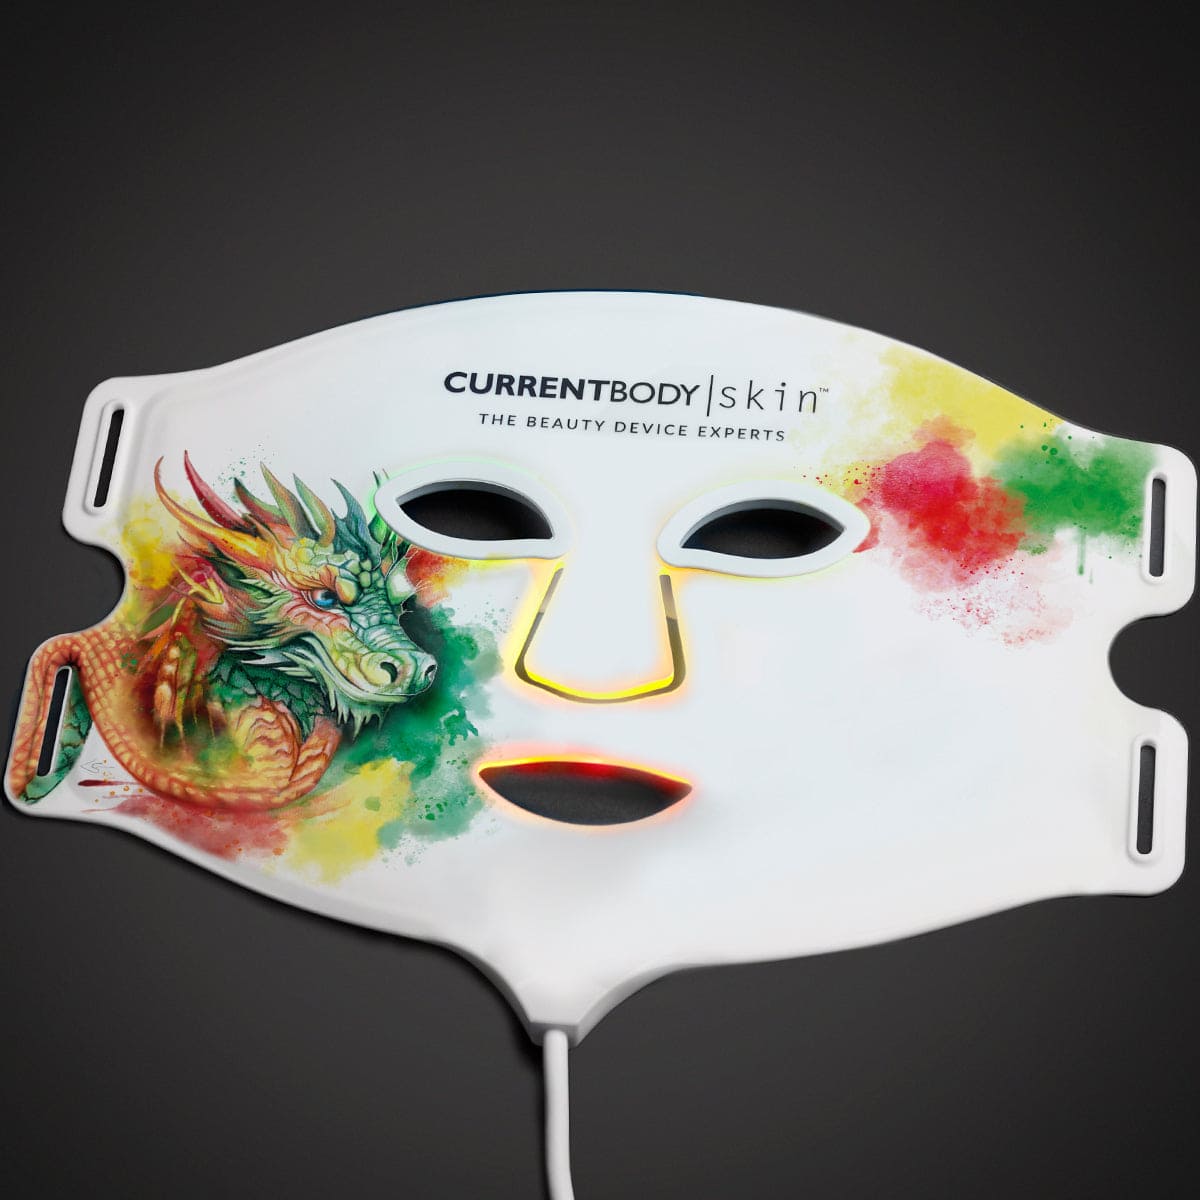 CurrentBody Skin LED 4-in-1 Zone Facial Mapping Dragon Edition Mask